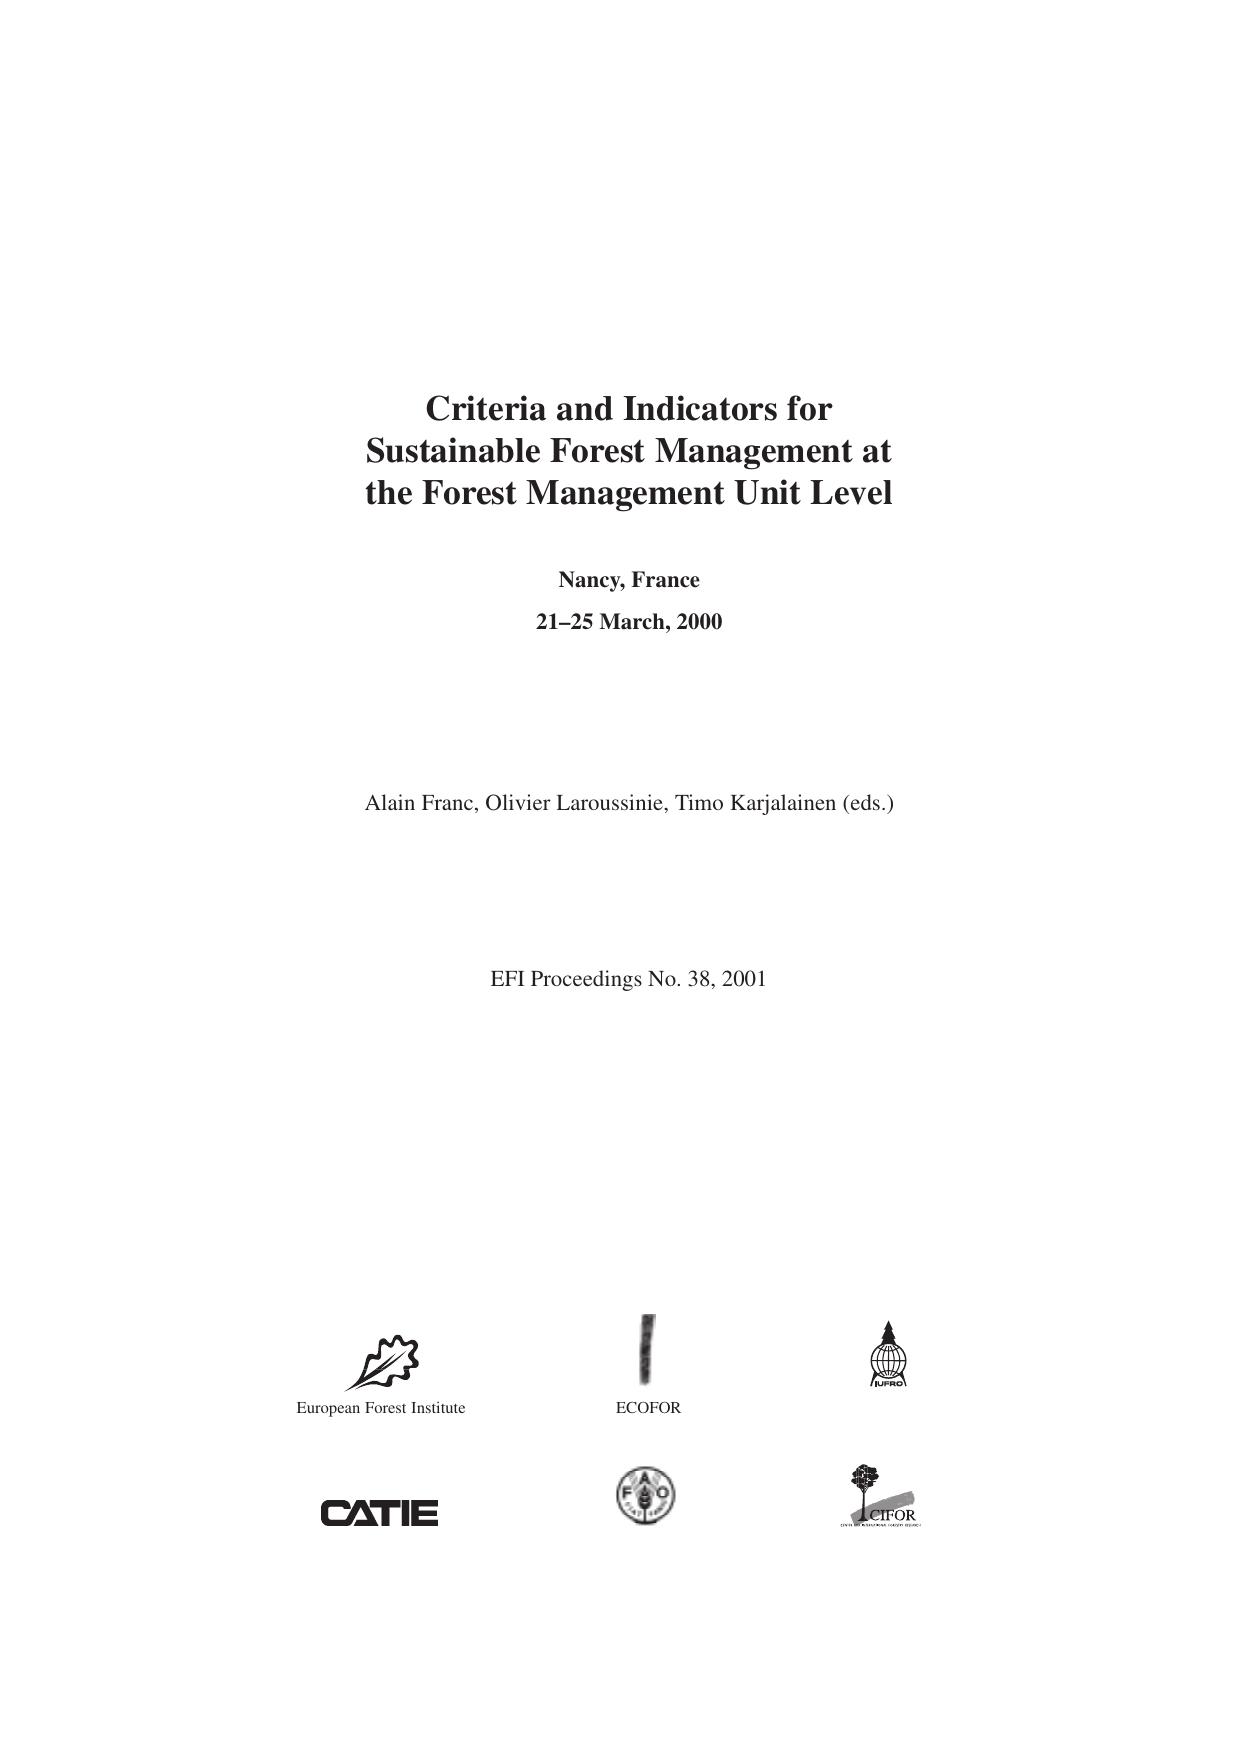 Criteria and indicators for sustainable forest management at the forest management unit level 2001